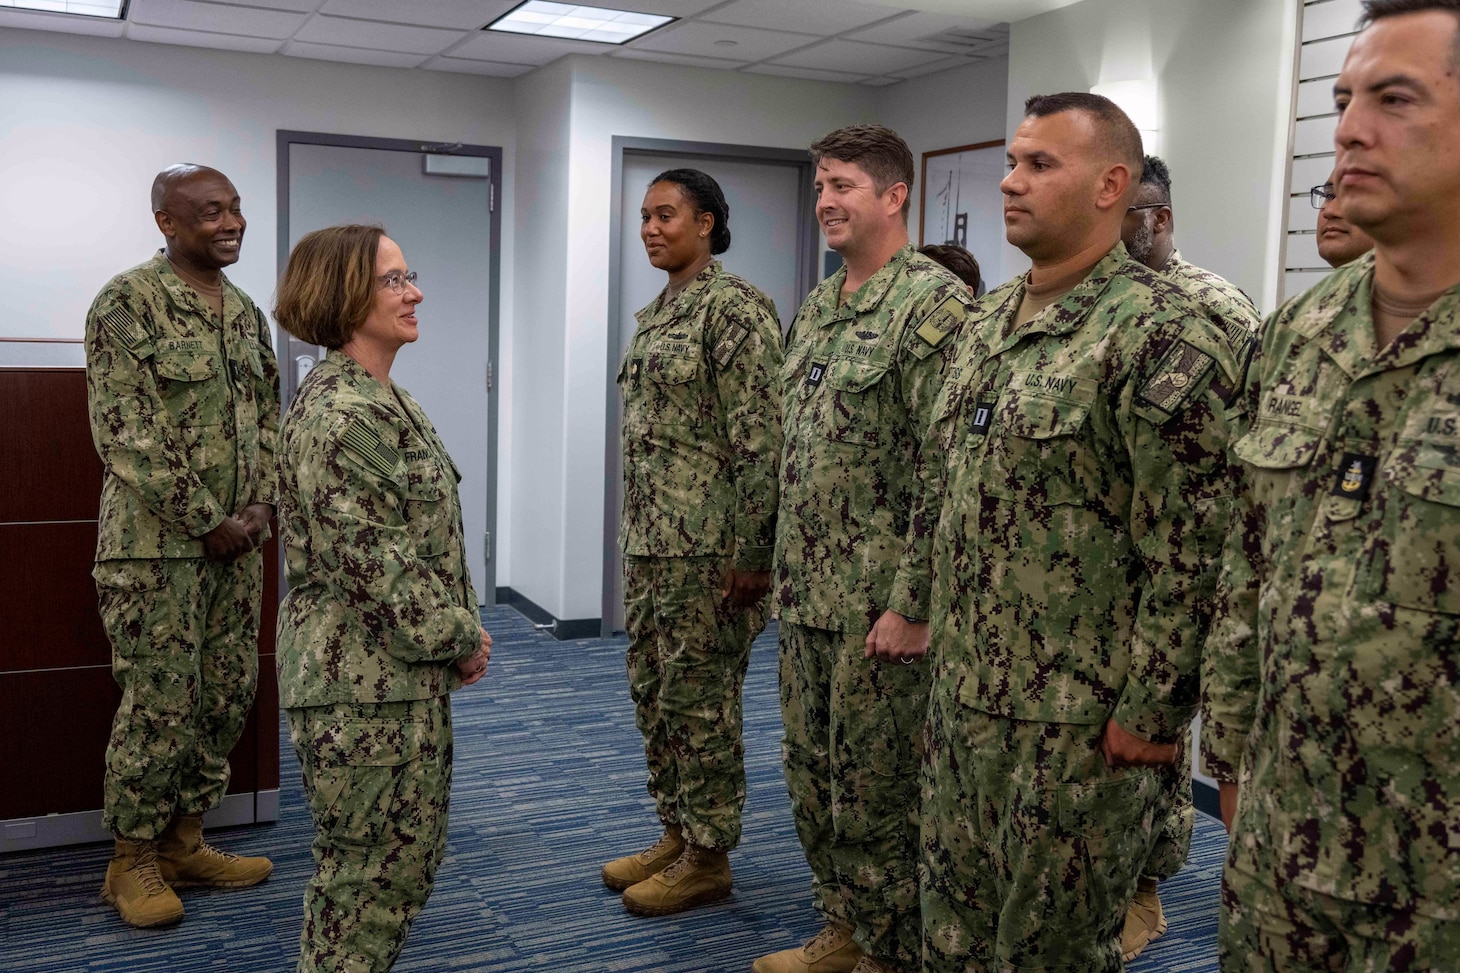 PEARL HARBOR, Hawaii (April 4, 2024) - Chief of Naval Operations Adm. Lisa Franchetti meets with Sailors assigned to Navy Closure Task Force – Red Hill, while visiting Joint Base Pearl Harbor-Hickam, Hawaii, April 4. Her visit reinforces the Navy’s commitment to the safe and enduring closure of the Red Hill Bulk Fuel Storage Facility. (U.S. Navy photo by Chief Mass Communication Specialist Amanda Gray)